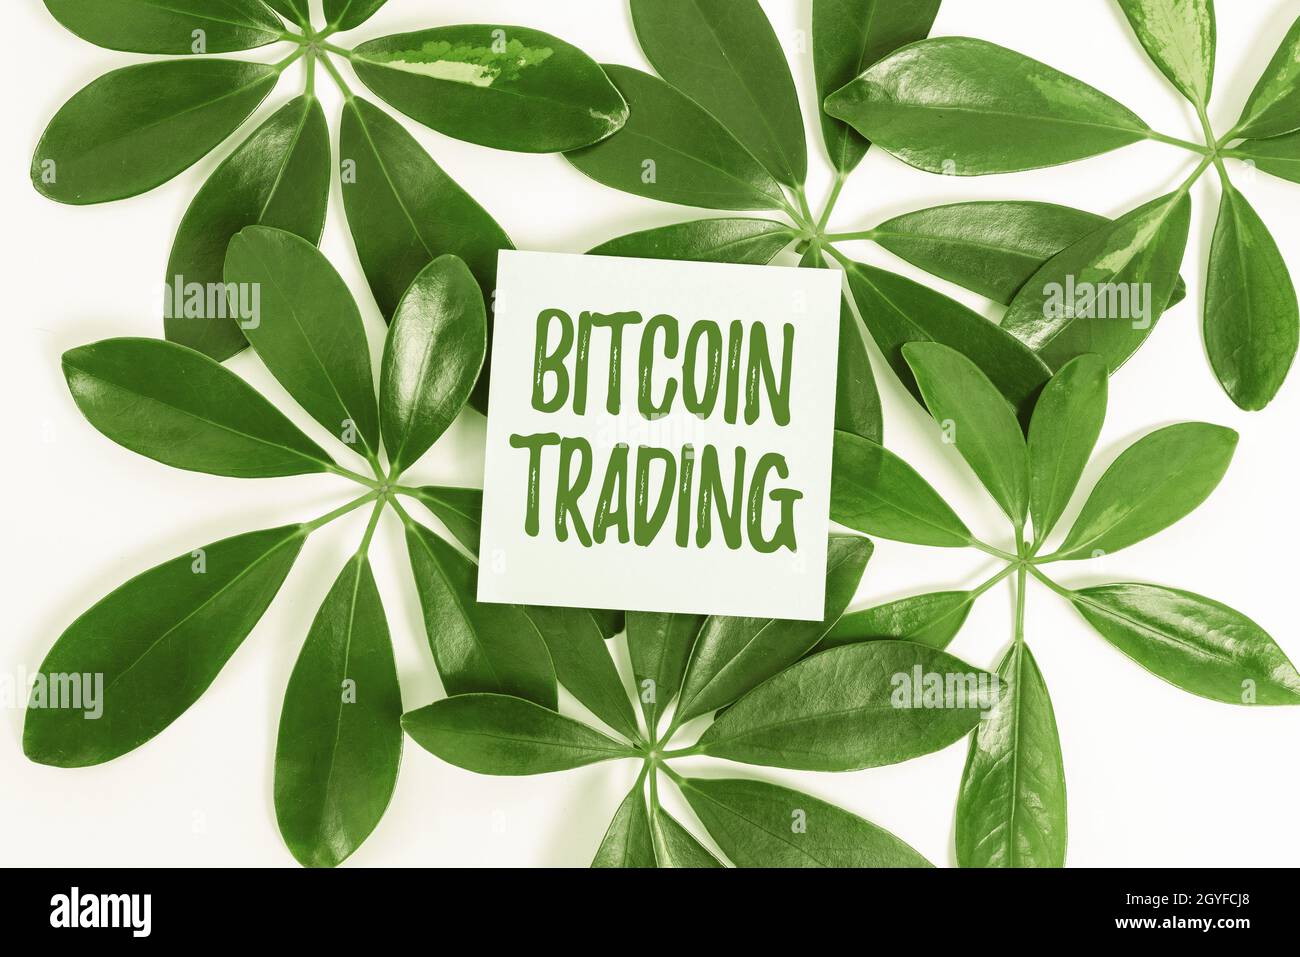 Inspiration showing sign Bitcoin Trading, Word for buying and selling of cryptocurrency in stocks market Saving Environment Ideas And Plans, Creating Stock Photo